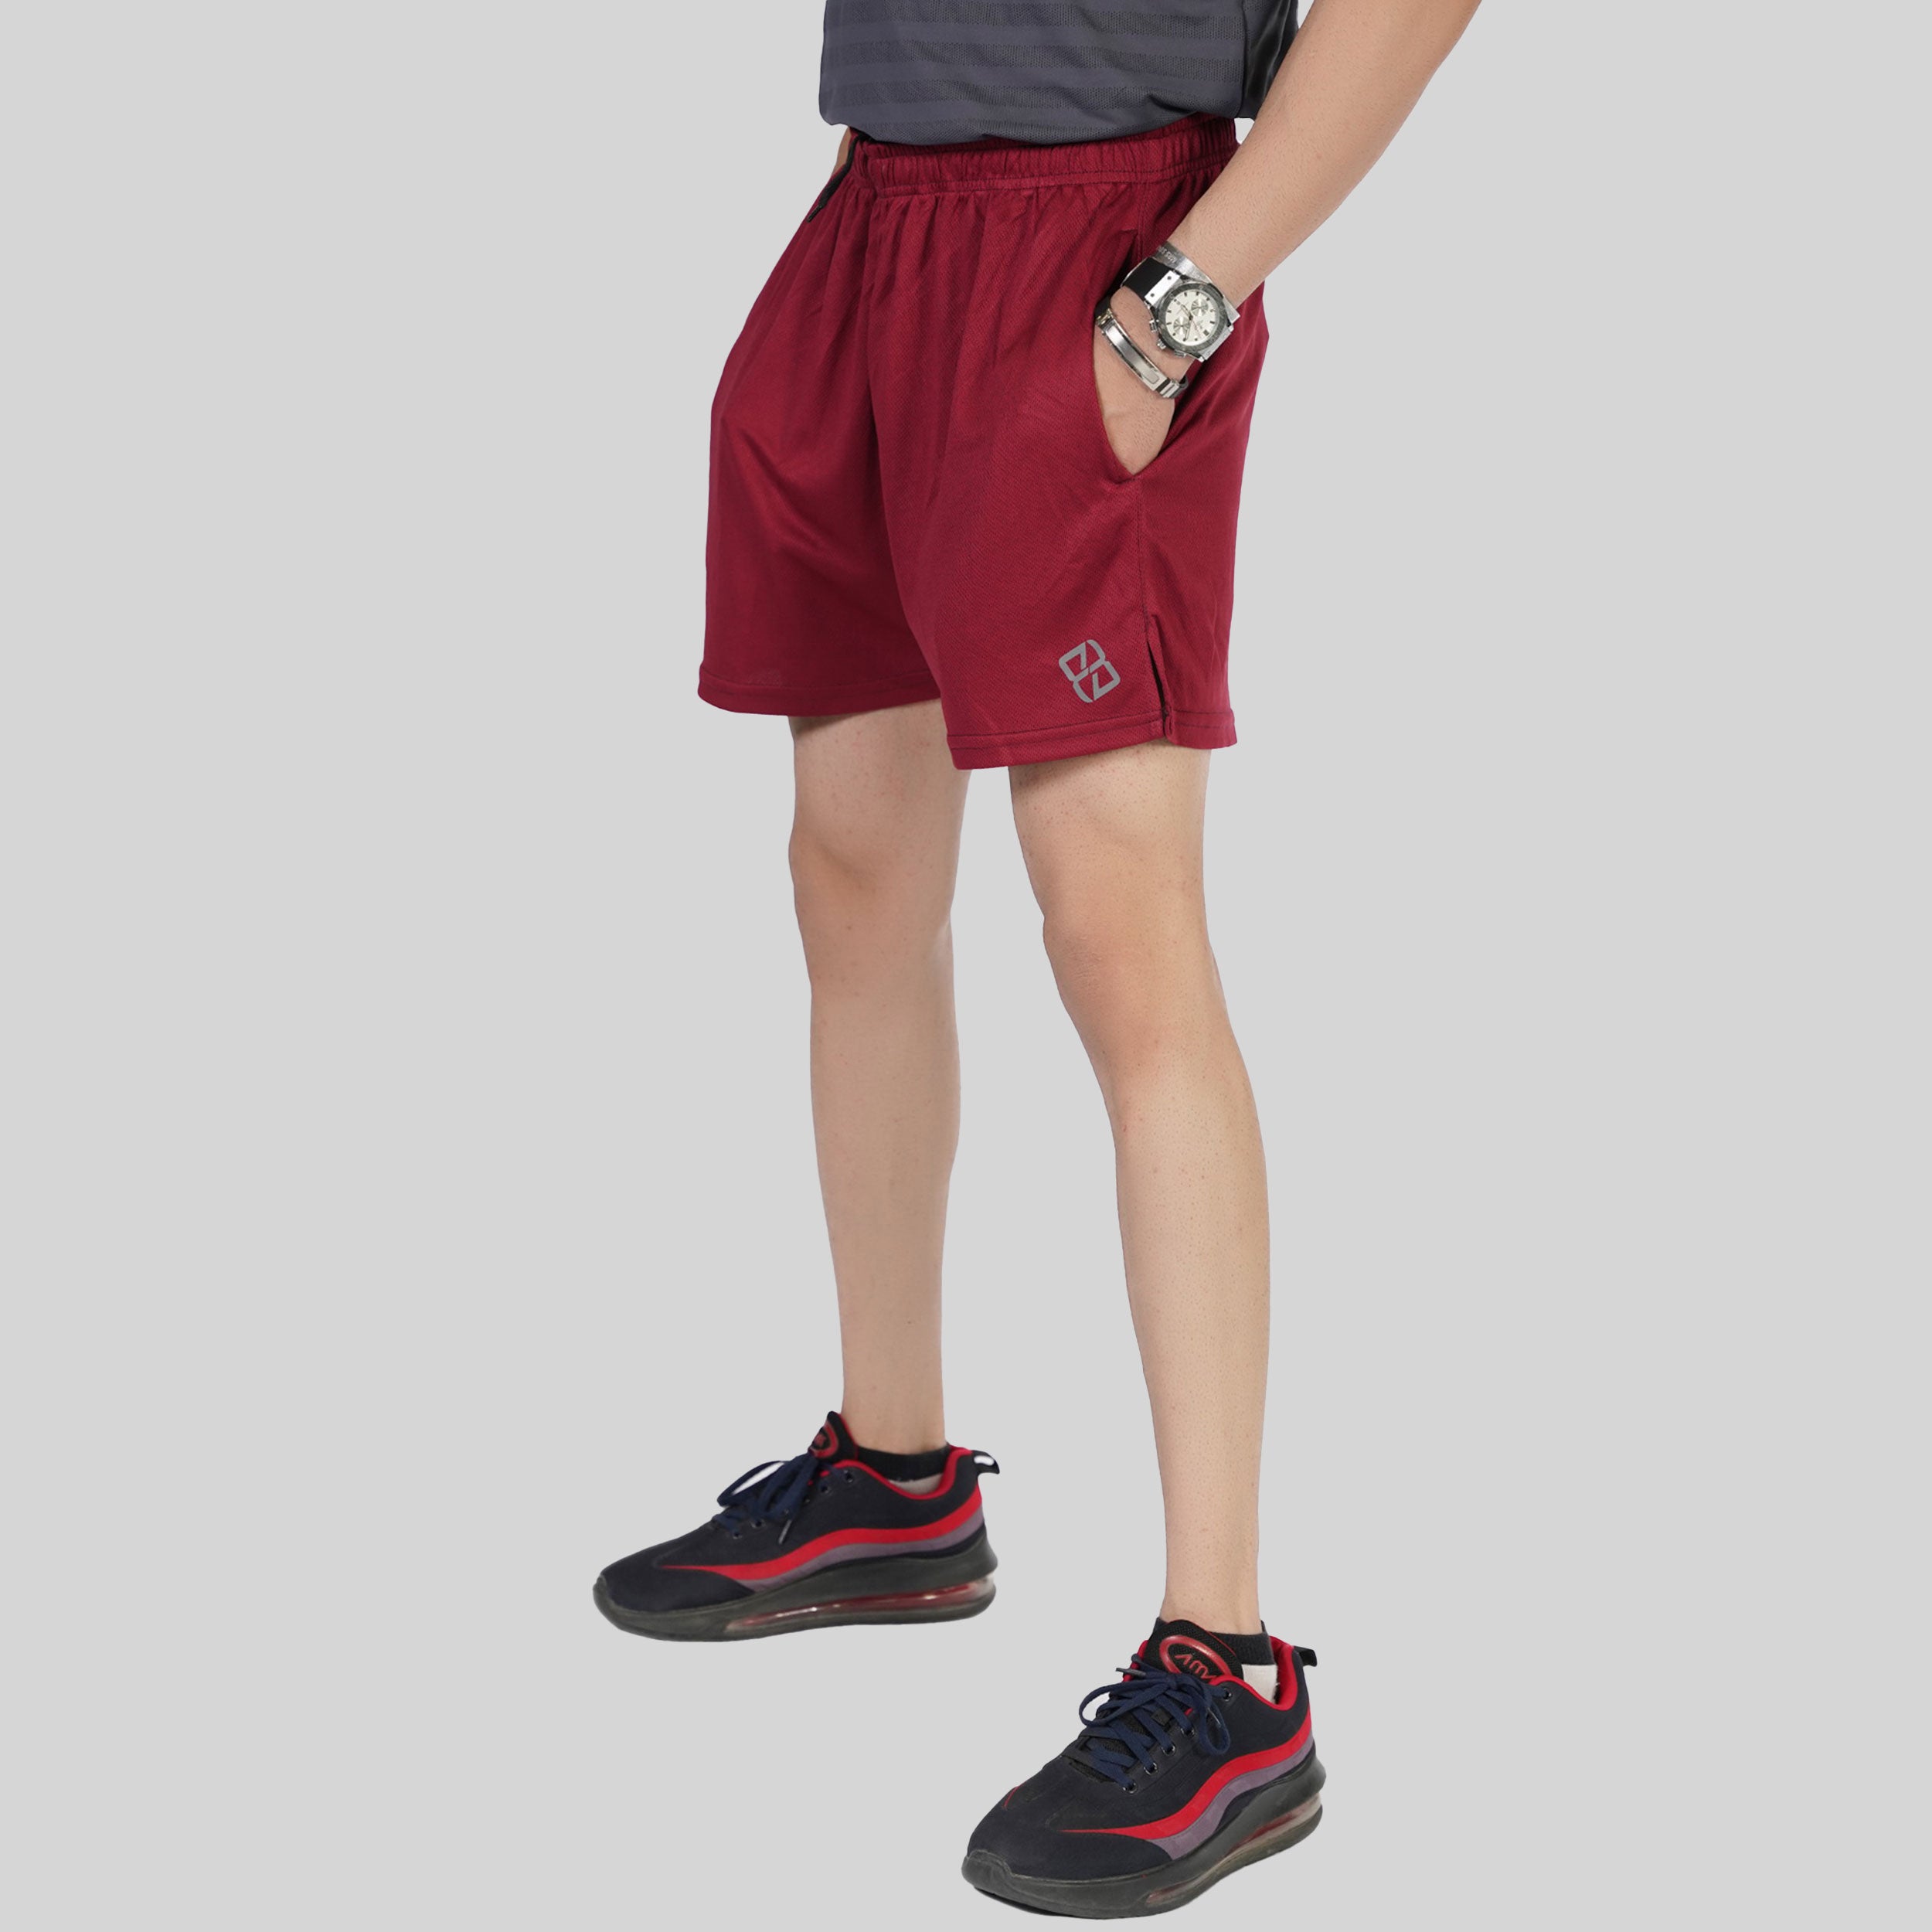 Men's Performance Tech Loose-Fit Red Shorts